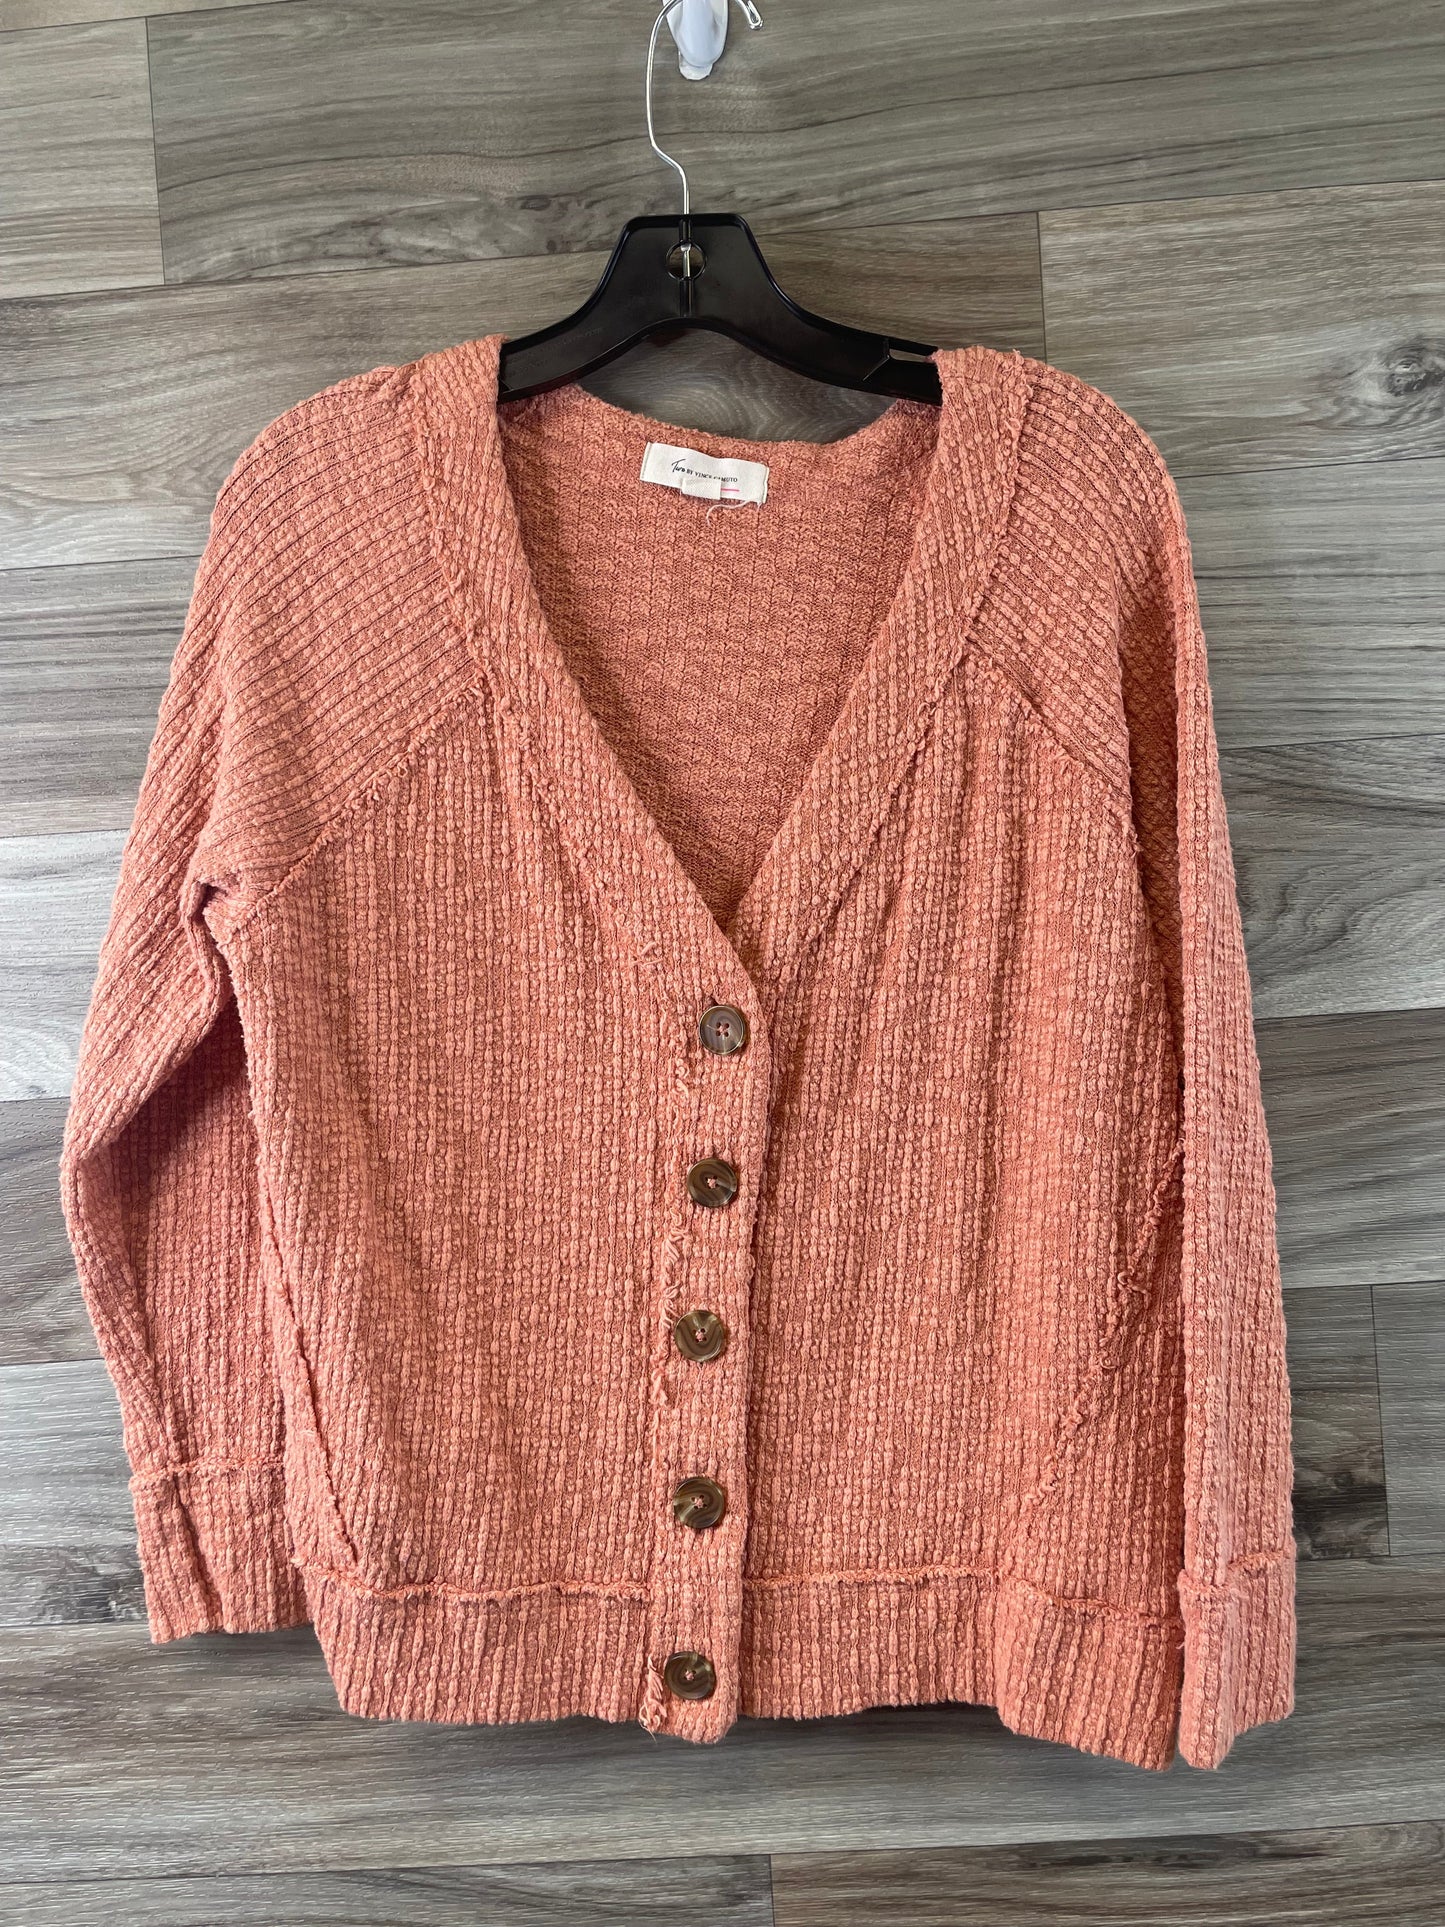 Orange Top Long Sleeve Basic Two By Vince Camuto, Size Large